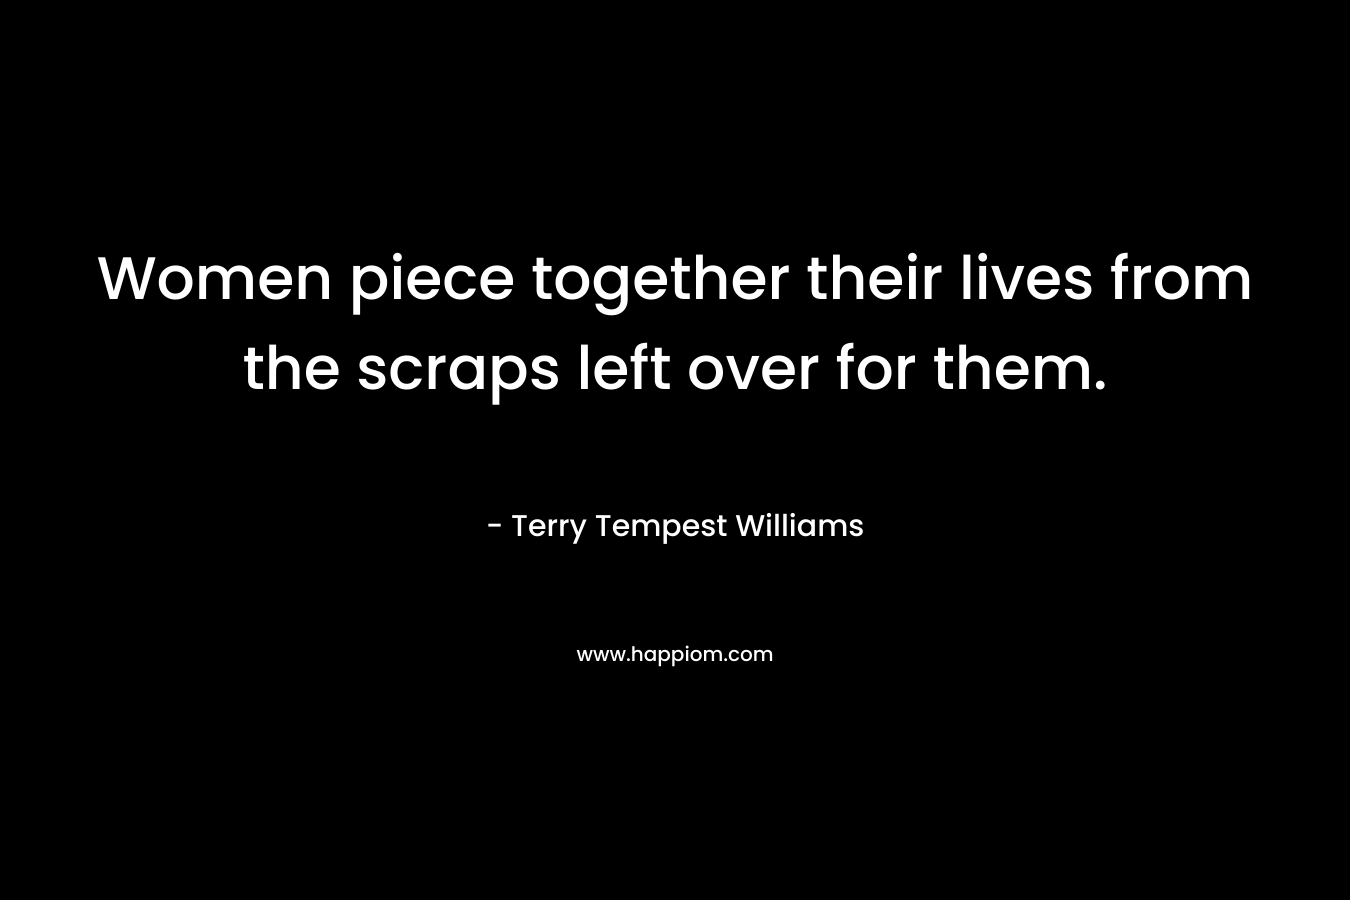 Women piece together their lives from the scraps left over for them.